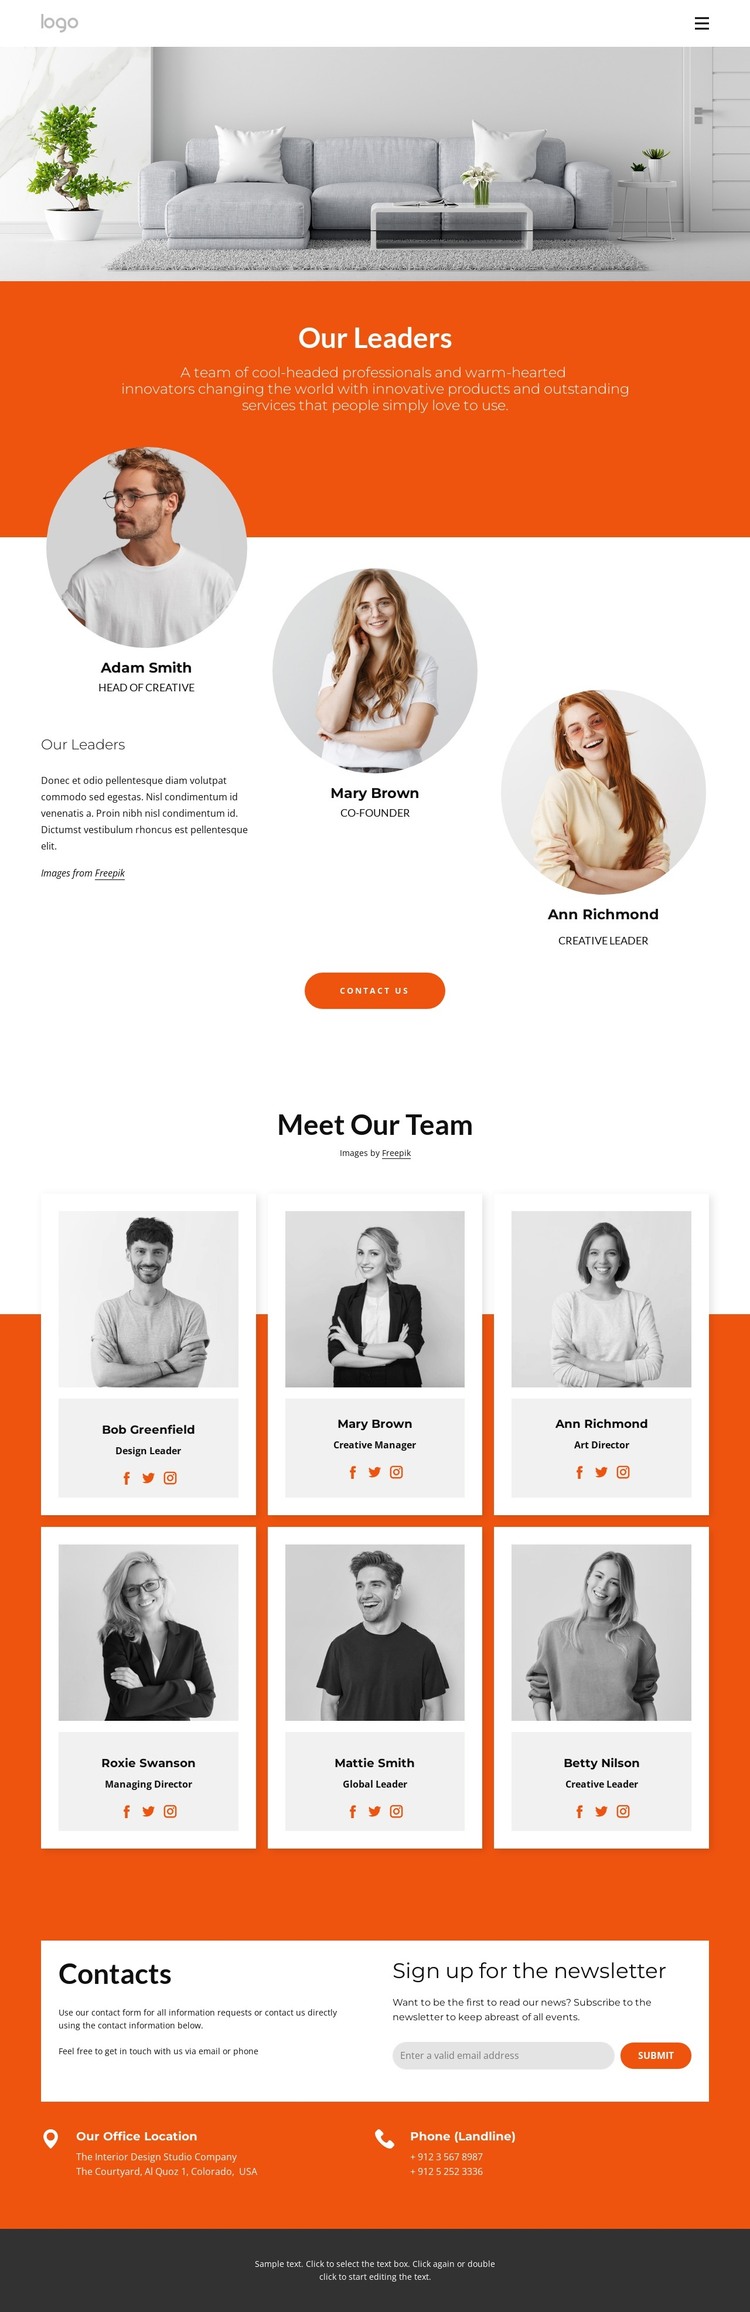 Our great team Web Design